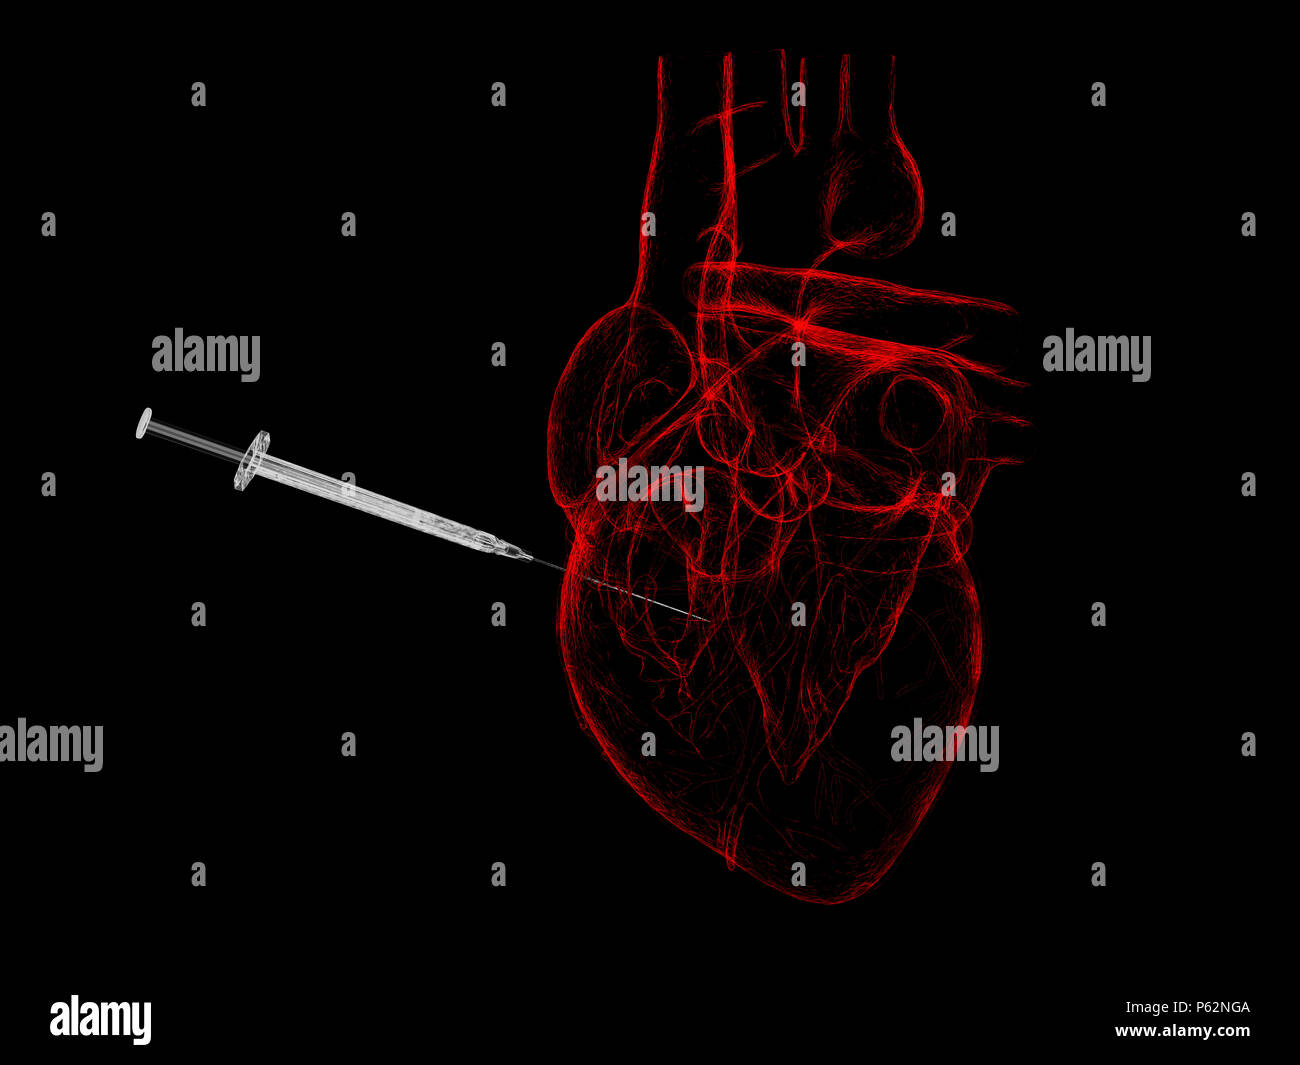 X Ray Red Injection Of Human Heart 3d Illustration On Black